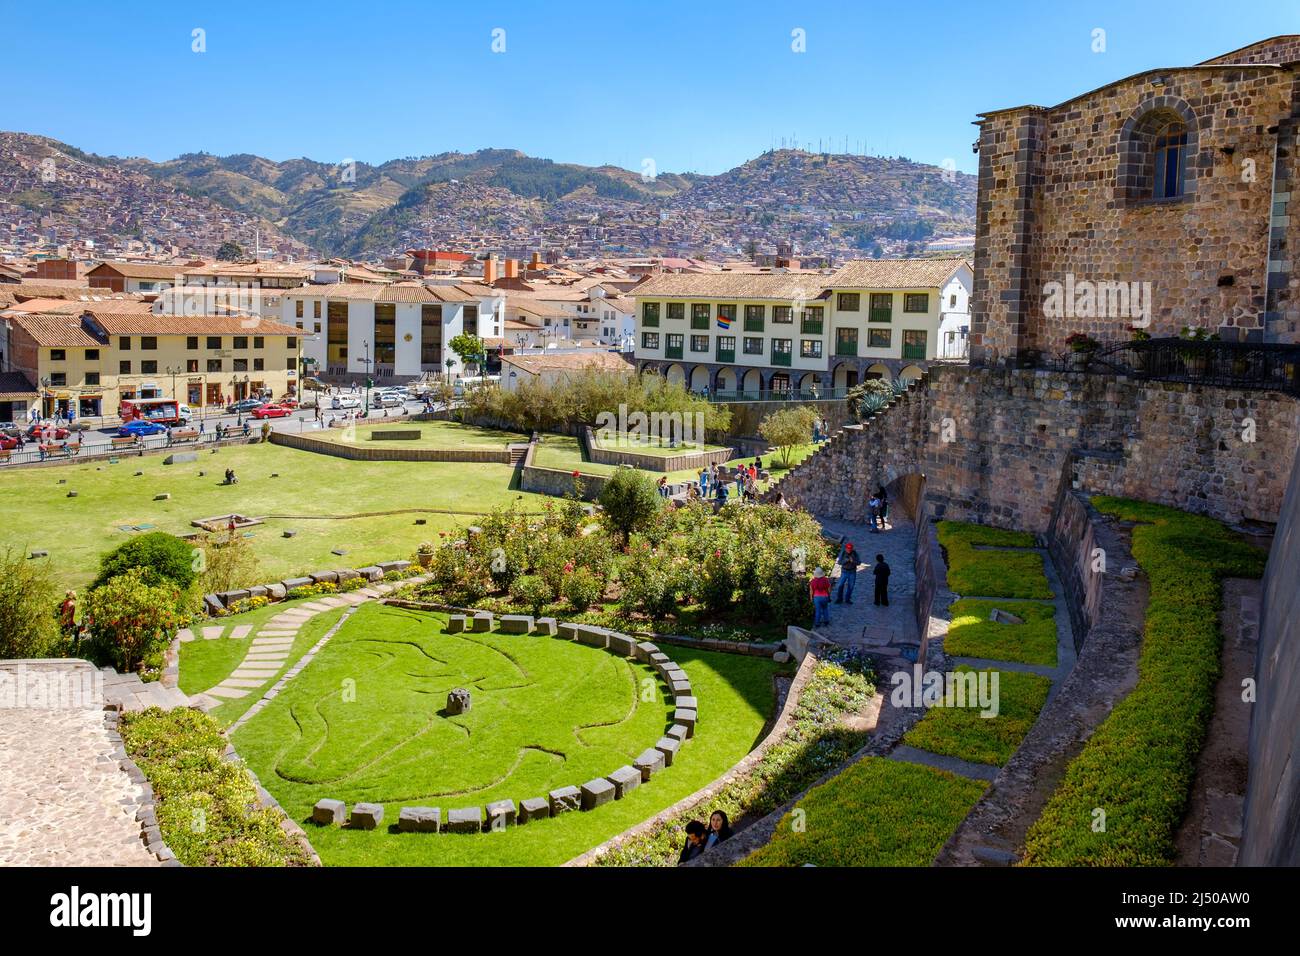 Courtyard, garden of Convent of Santo Domingo and church built on top of Coricancha Temple Incan ruins in Cusco, Sacred Valley, Peru. Stock Photo